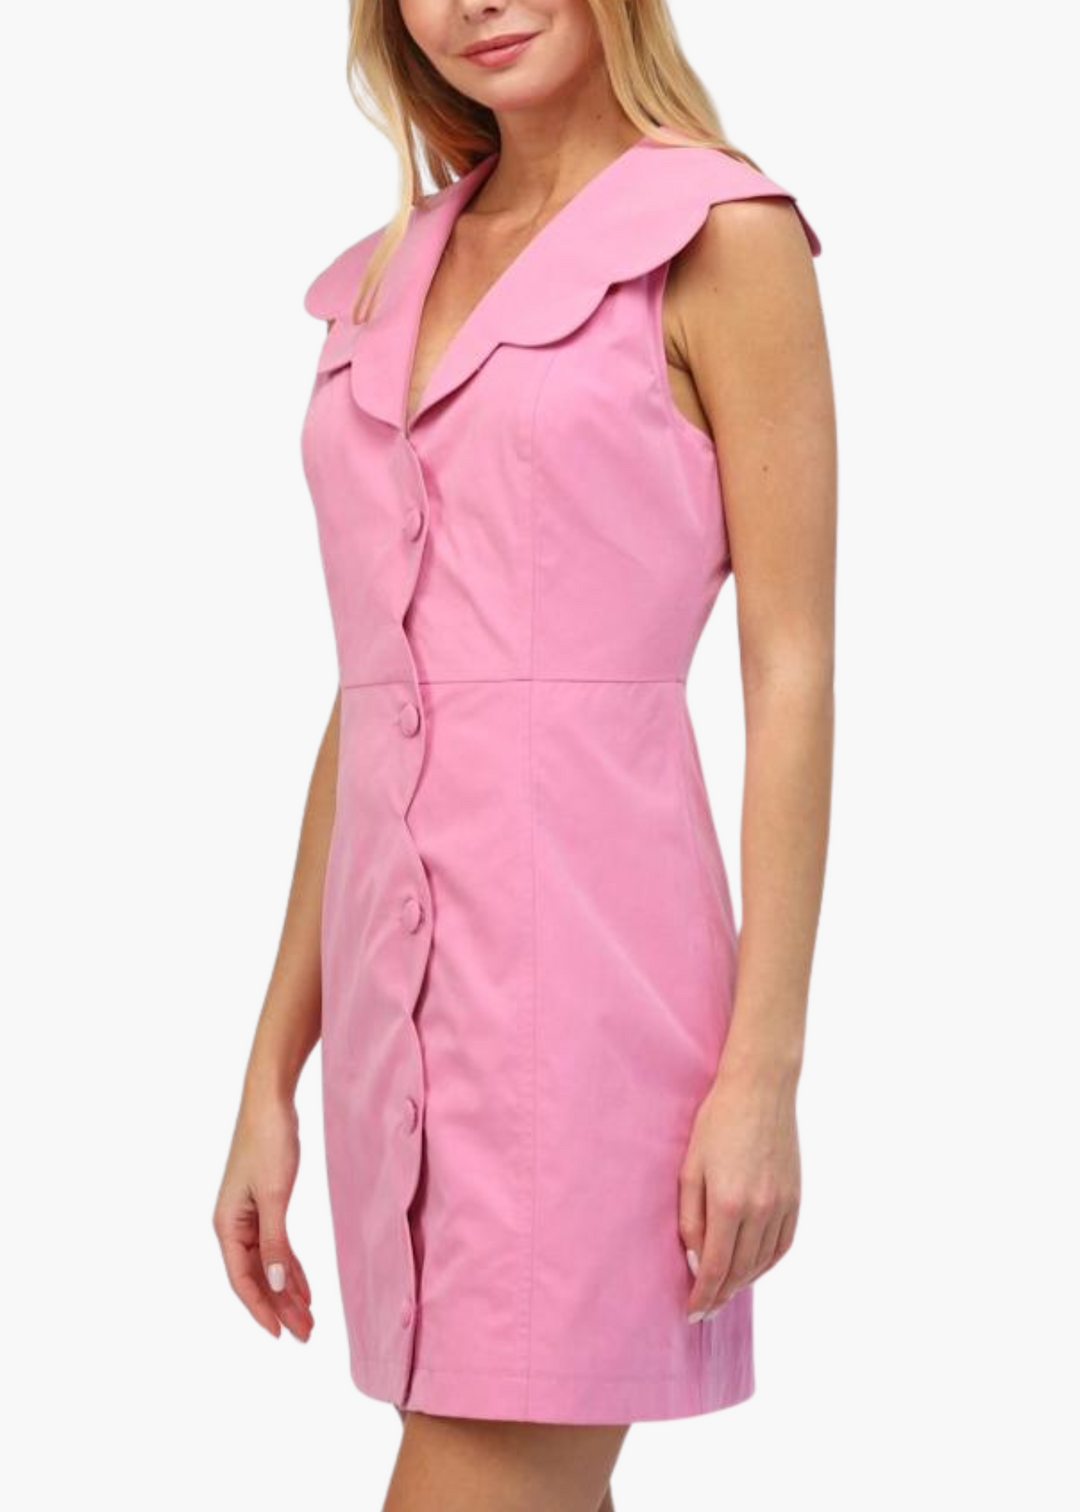 Scalloped Button Down Dress in Pink